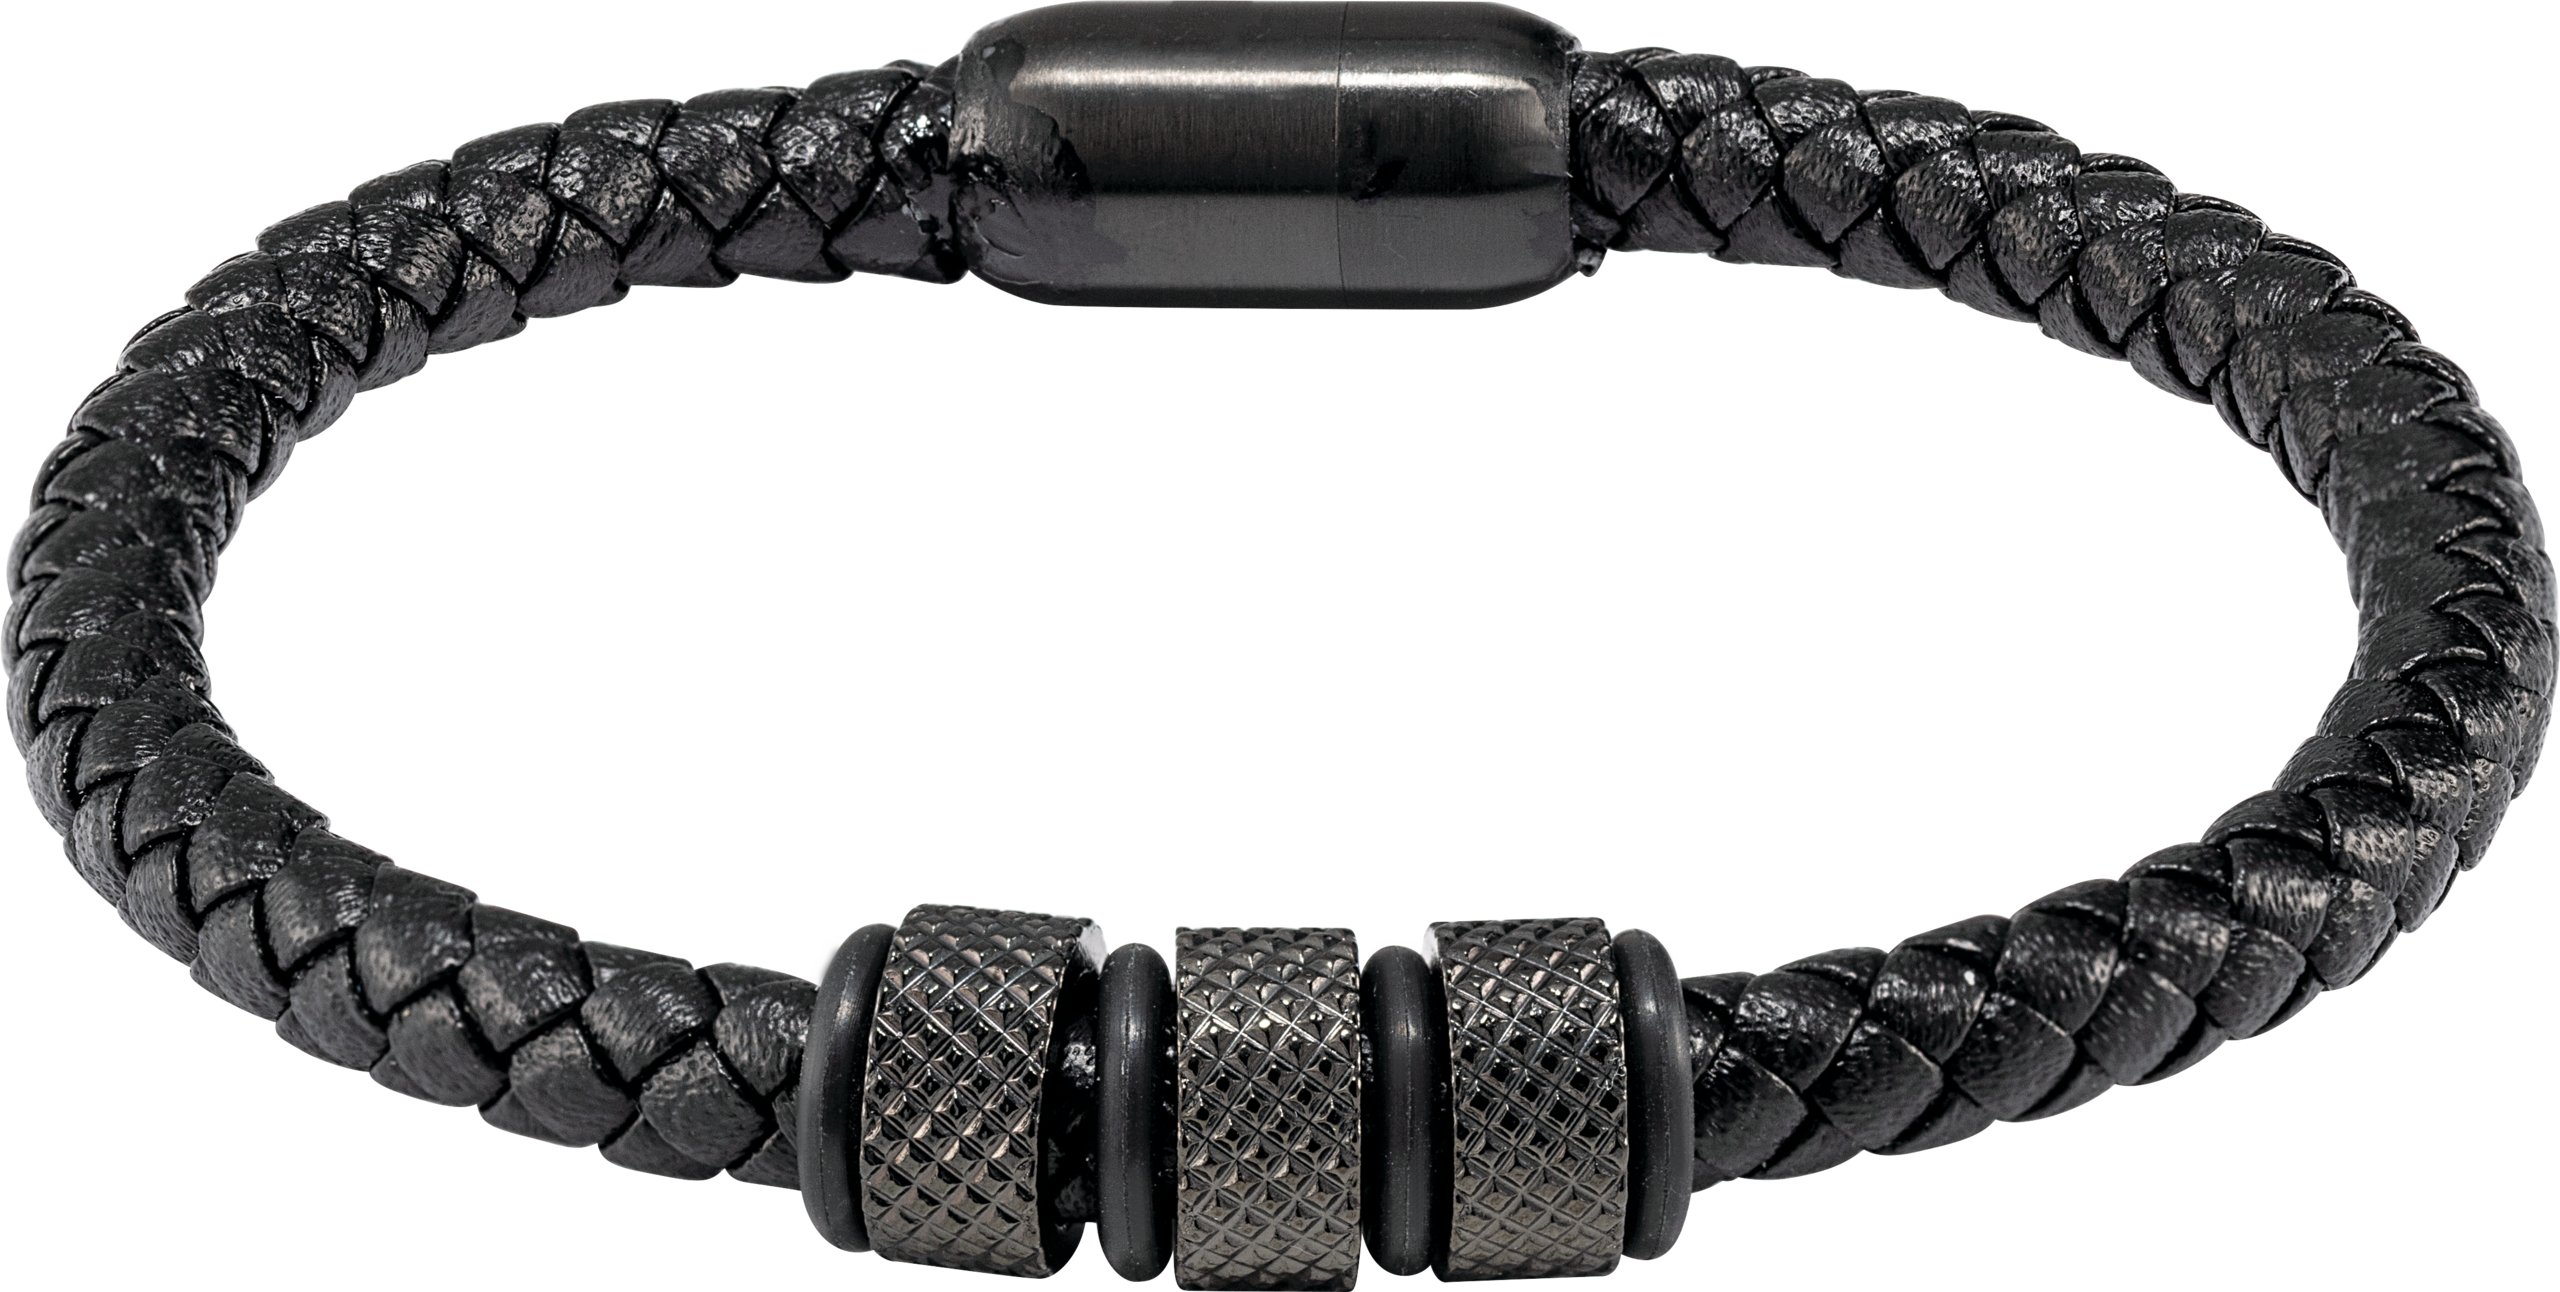 Black PVD Stainless Steel 6 mm Braided Leather 9" Bracelet